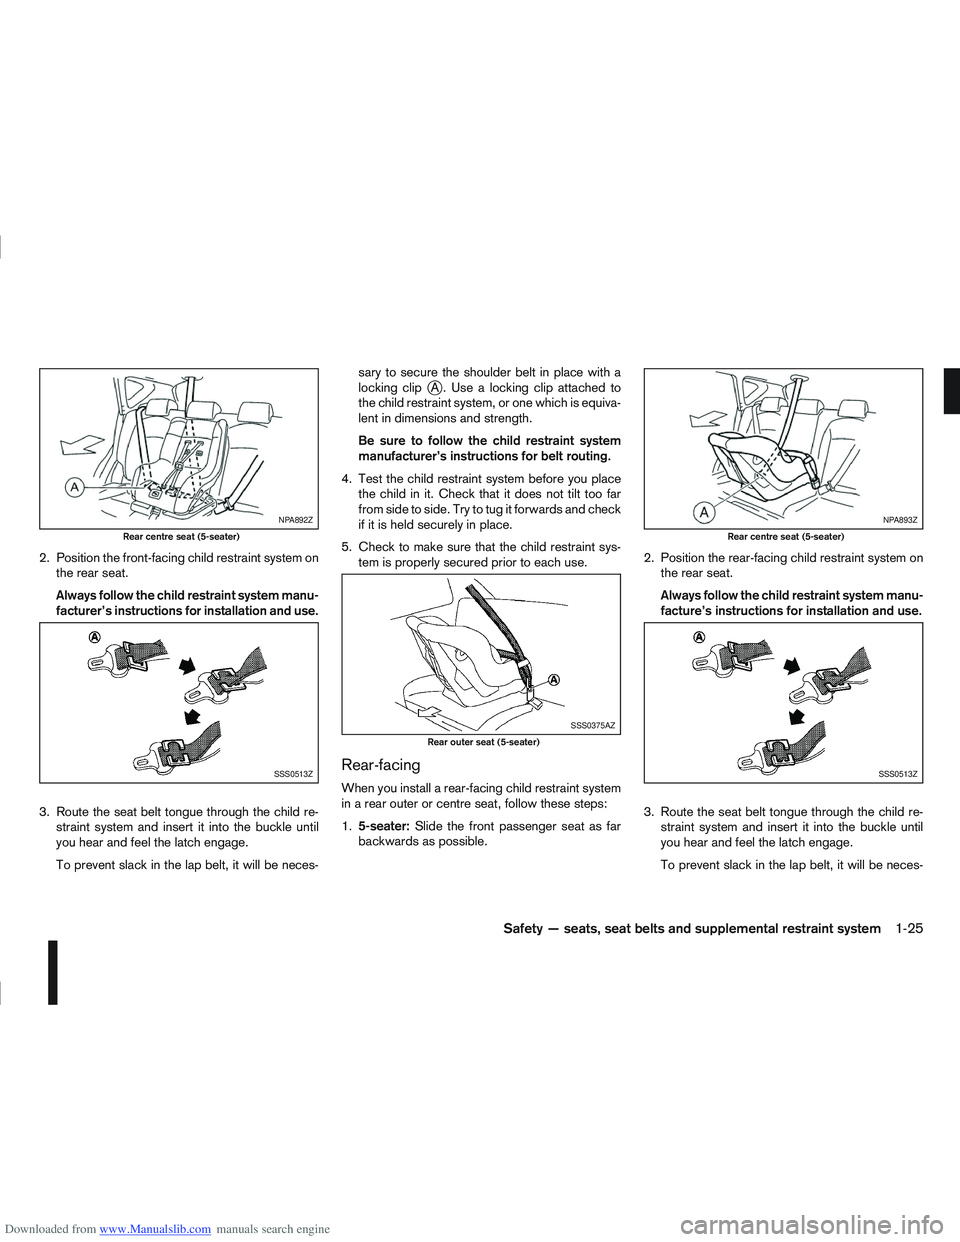 NISSAN QASHQAI 2012 Service Manual Downloaded from www.Manualslib.com manuals search engine 2. Position the front-facing child restraint system onthe rear seat.
Always follow the child restraint system manu-
facturer’s instructions f